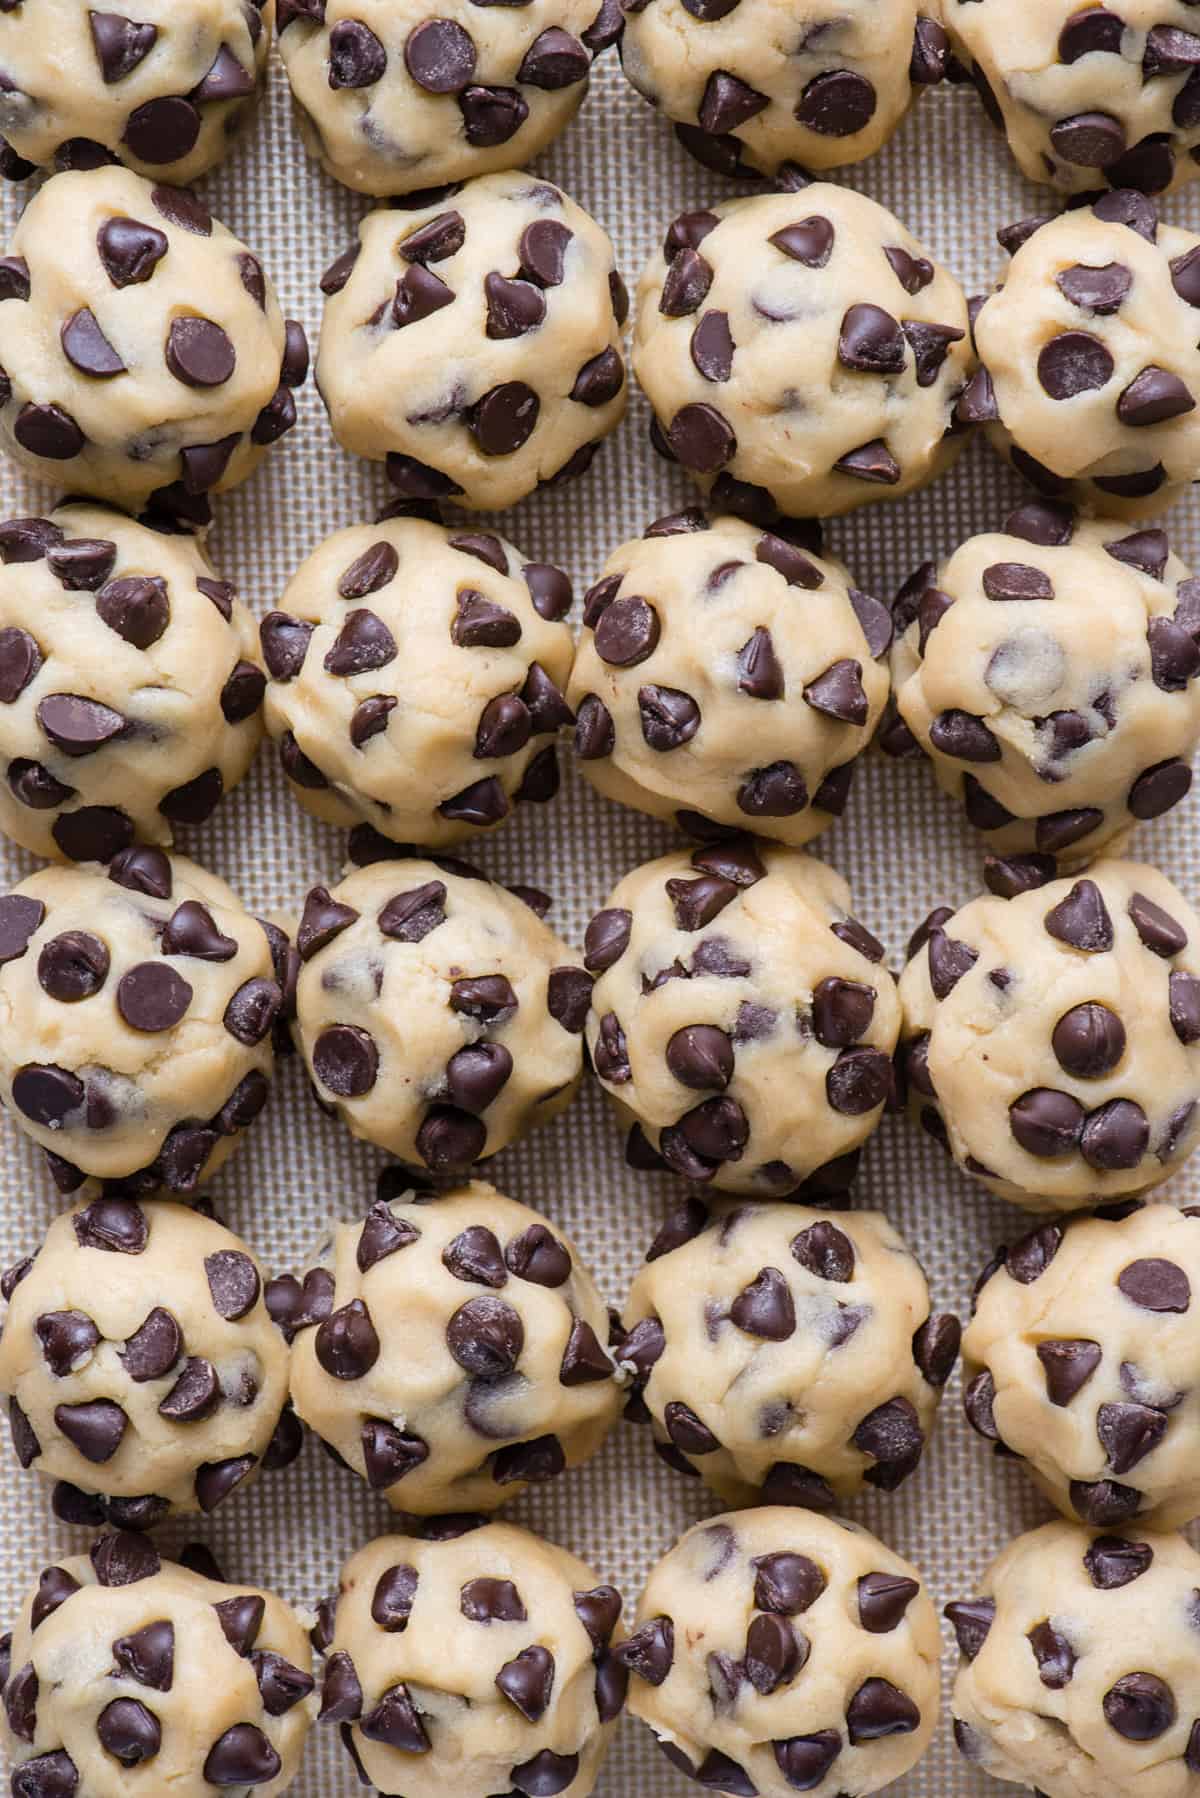 chocolate chip cookie dough balls arranged in a grid pattern